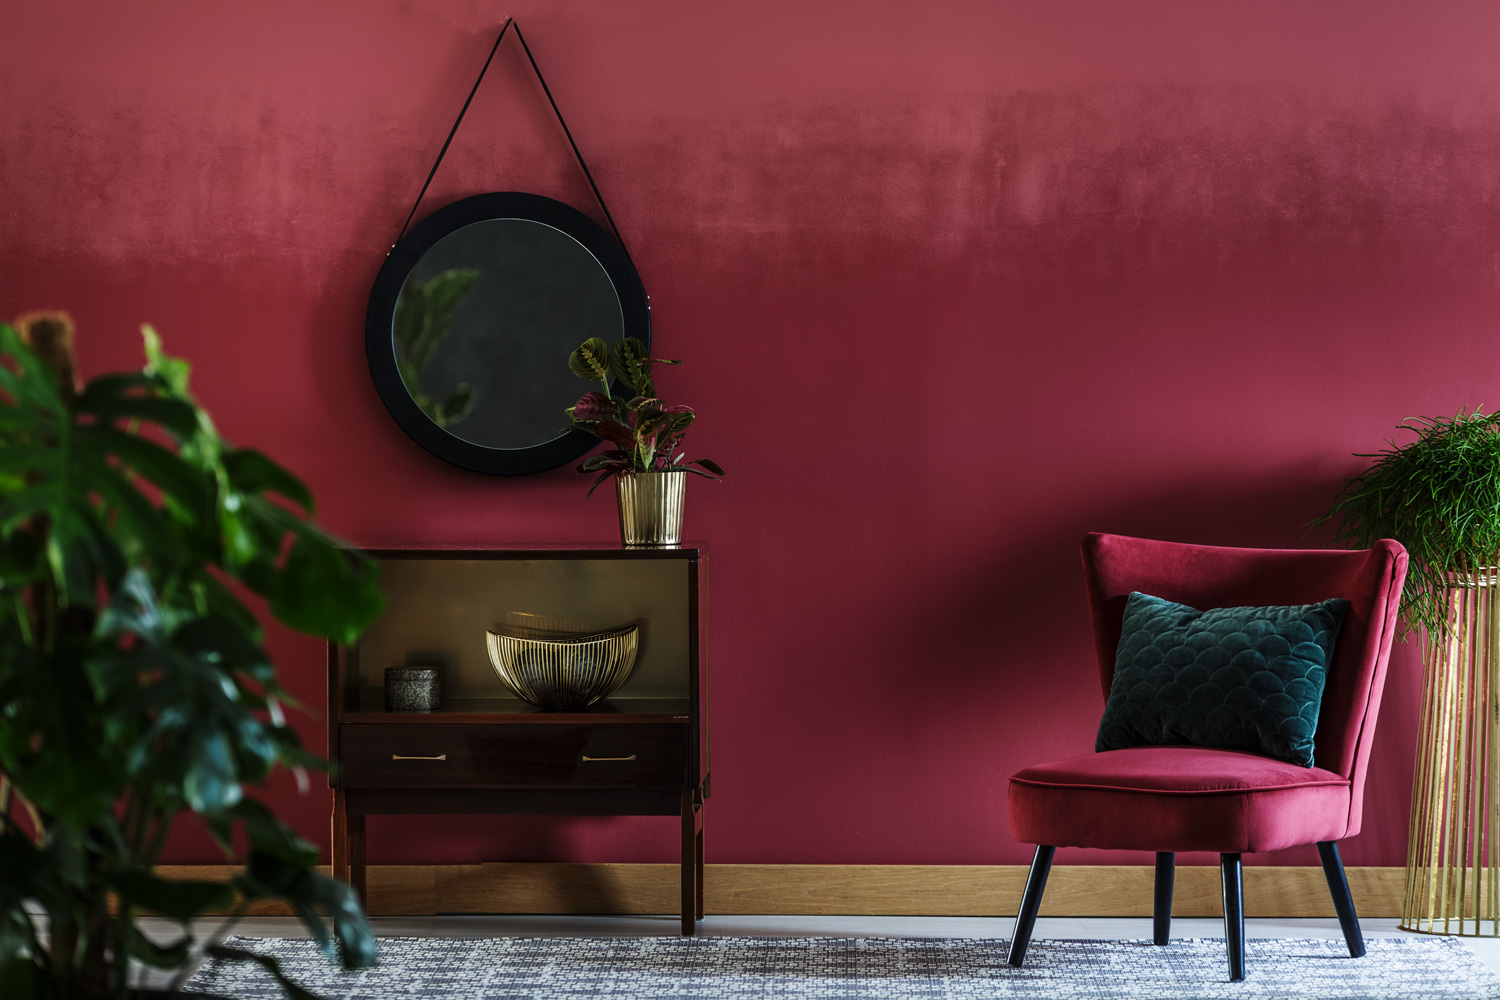 Close-up of a plant in sitting room interior with red armchair, retro cupboard, round mirror and dark red wall